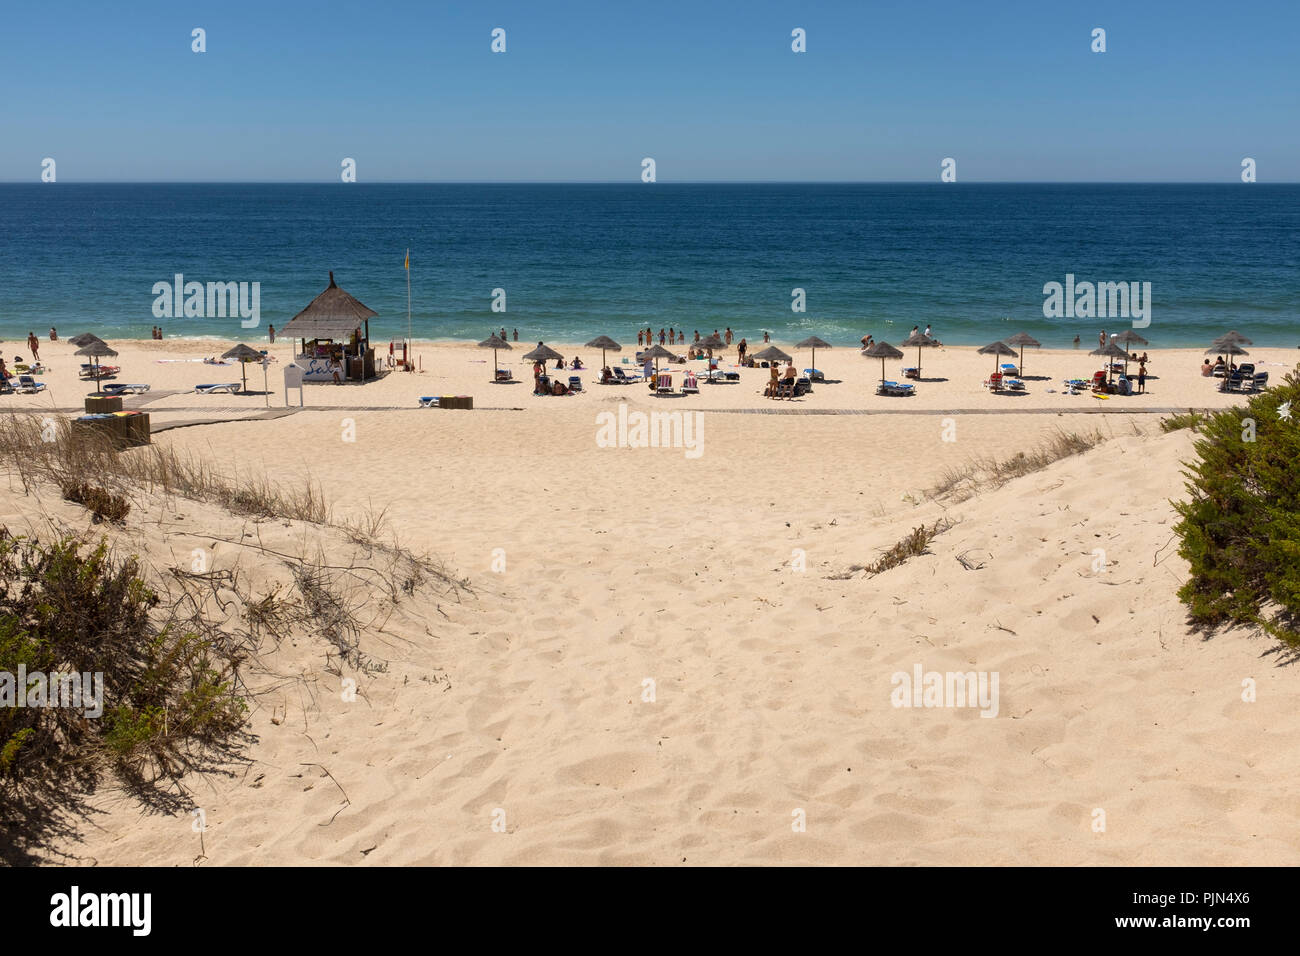 Umbrellas and people at Praia do Pego, also known as Pego Beach, Carvalhal, Portugal, during summer Stock Photo